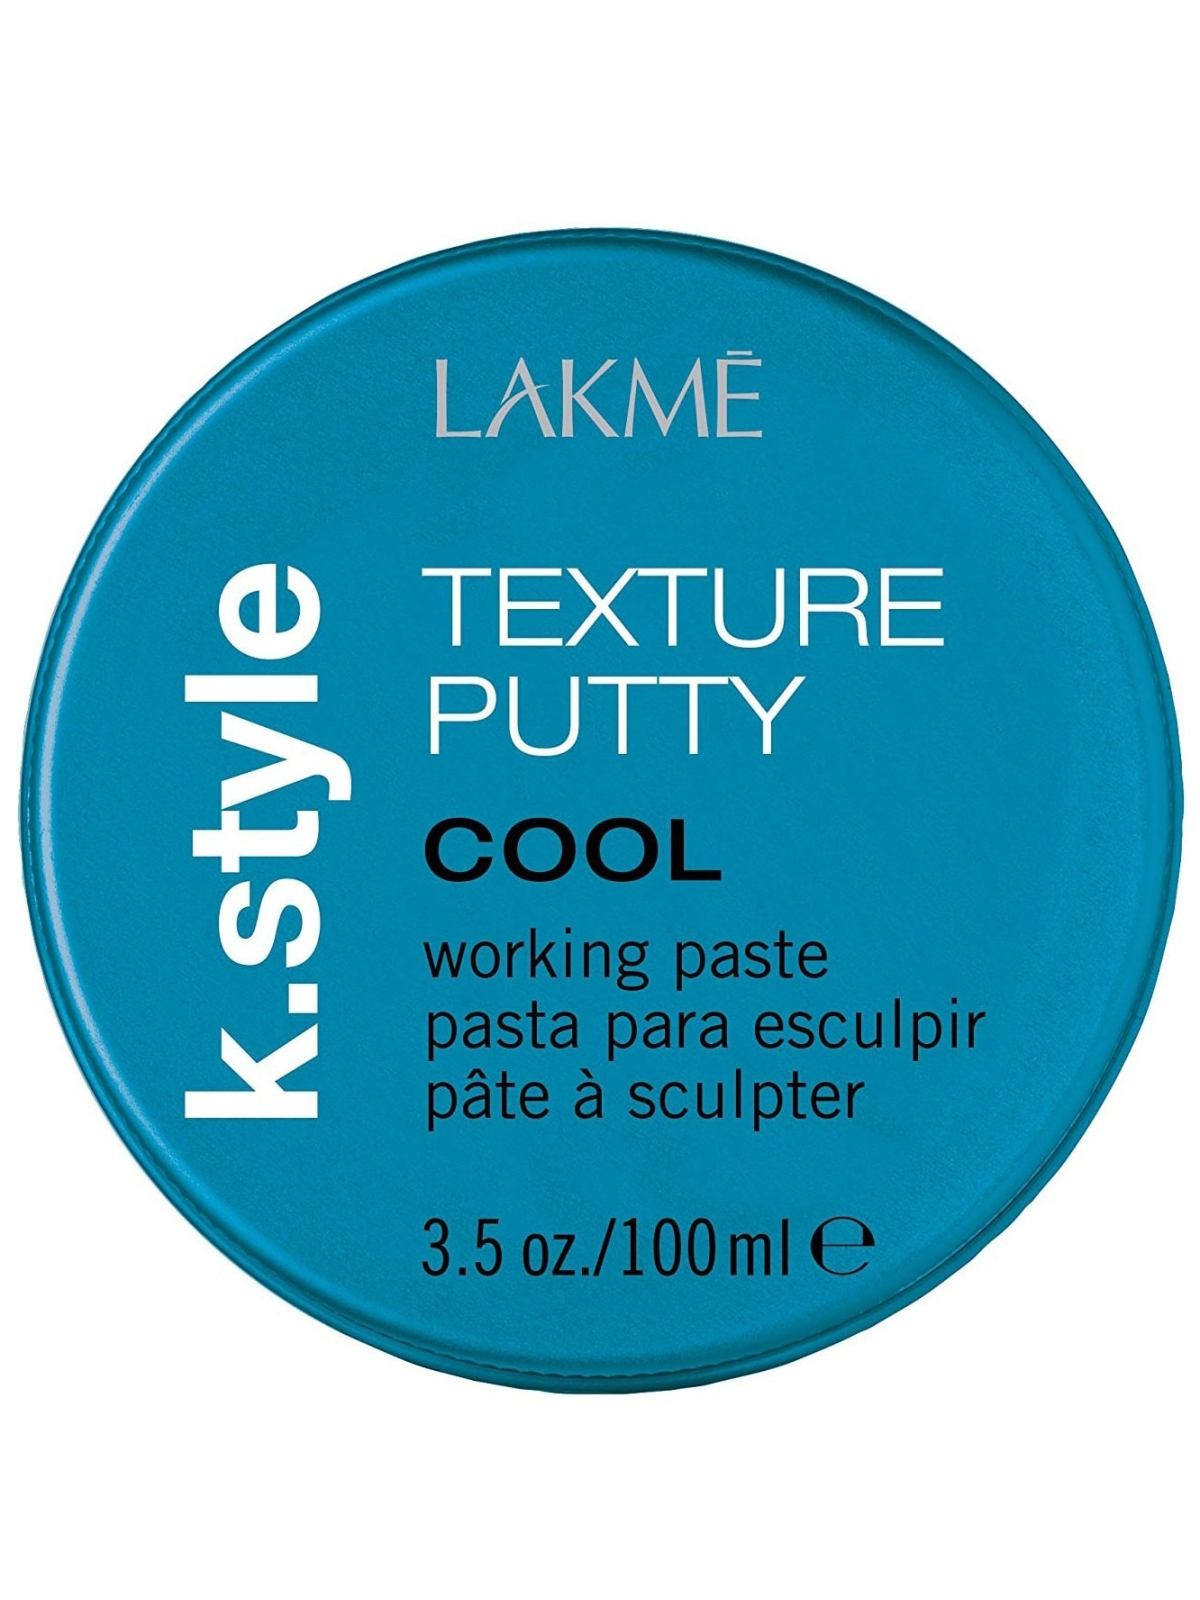 TEXTURE PUTTY WORKING PASTE K.STYLE LAKME